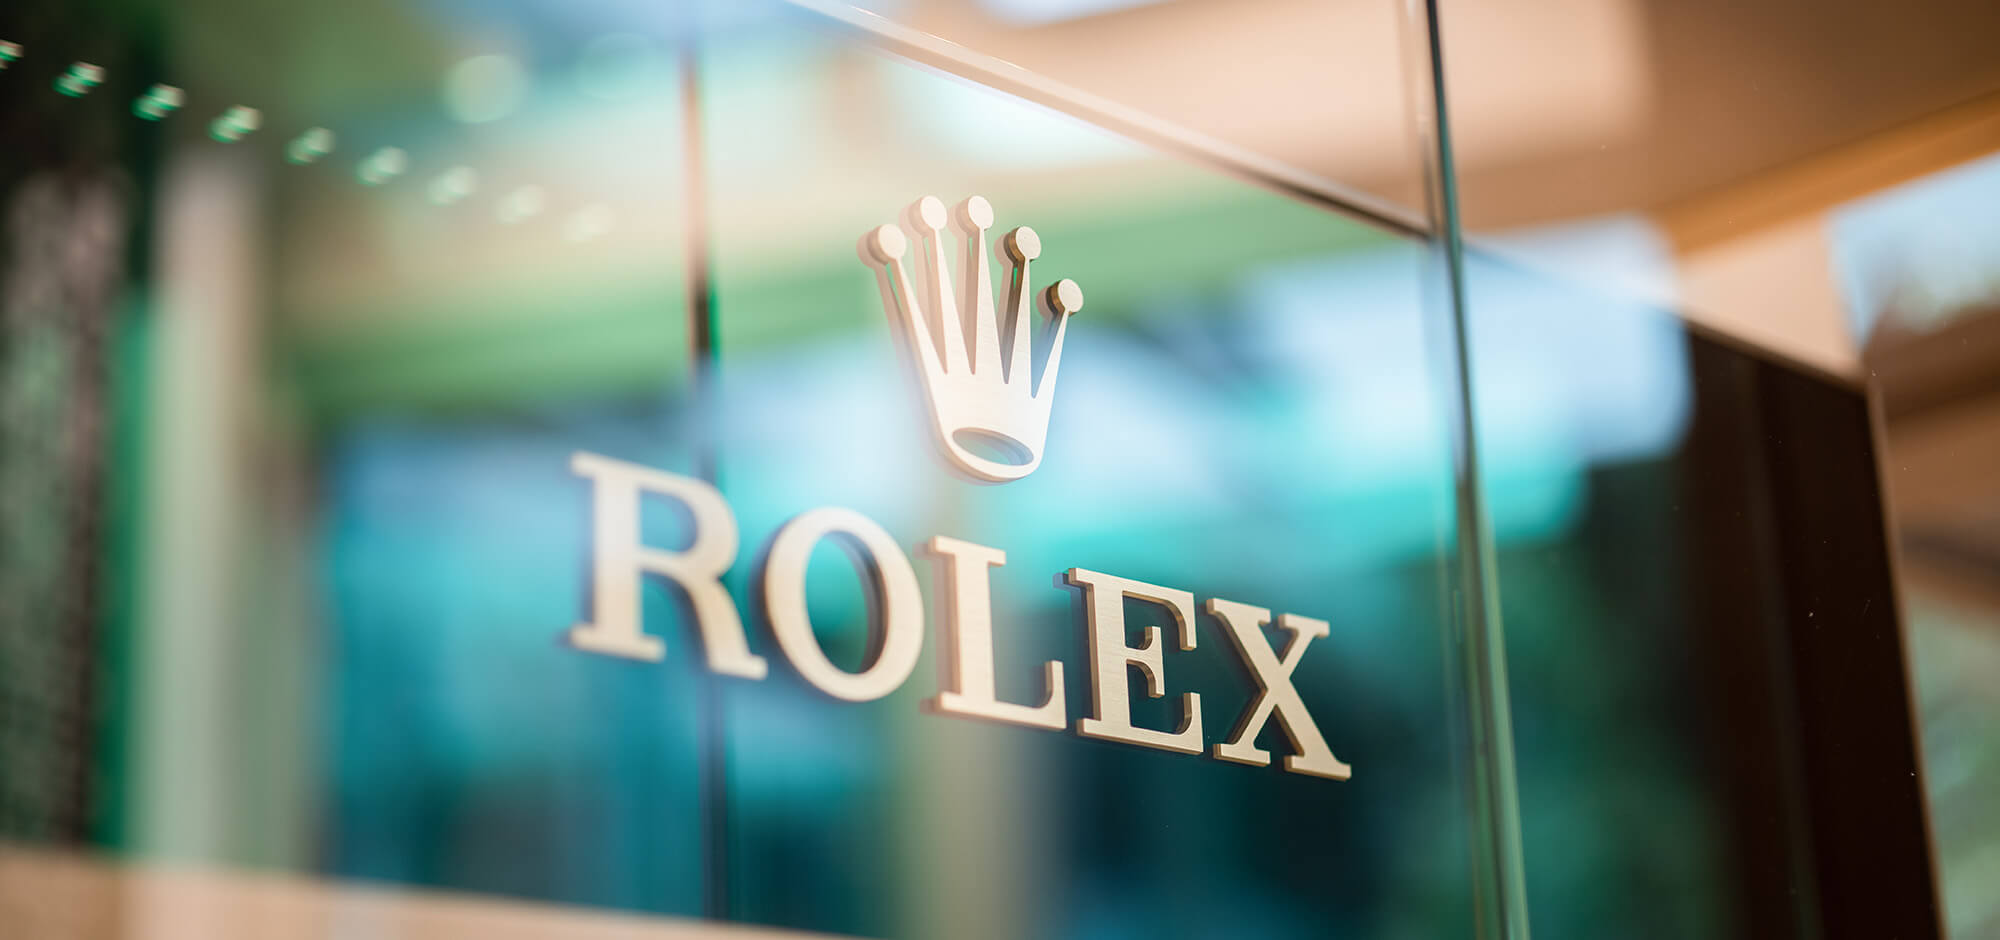 explore the rolex history - global watch company